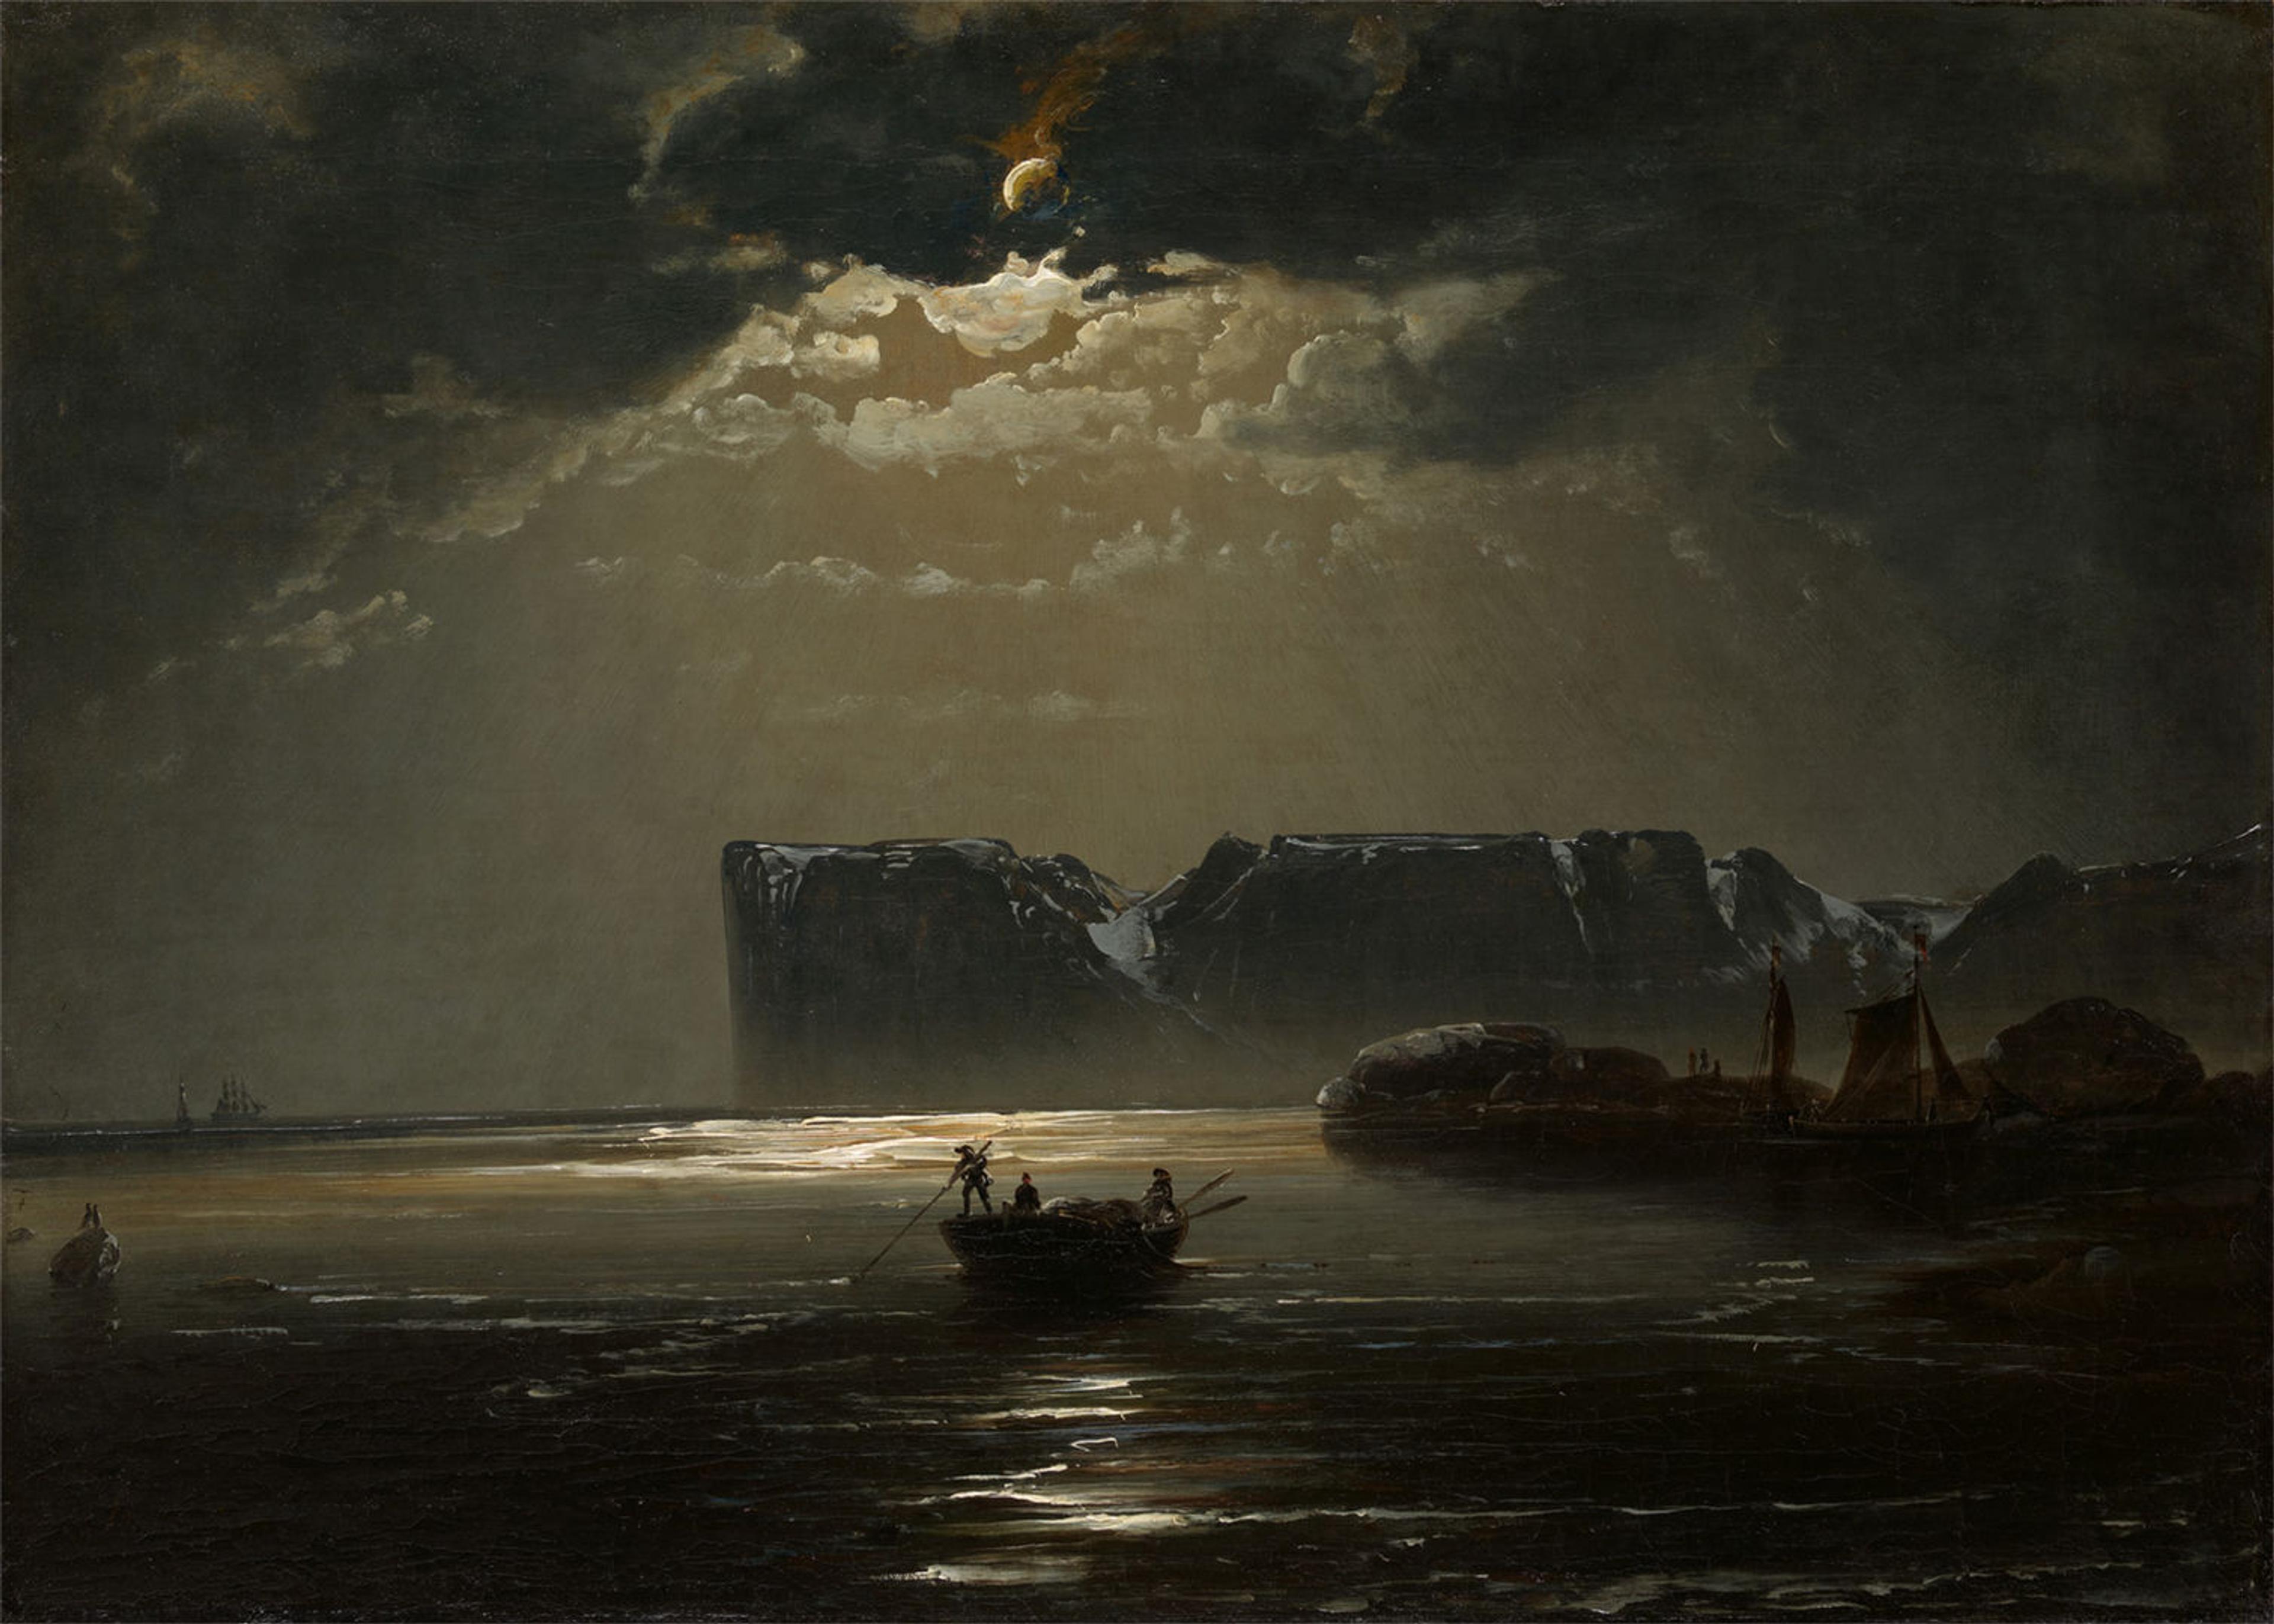 A painting of a moonlit sea, with boats, and off in the distance a large iceburg